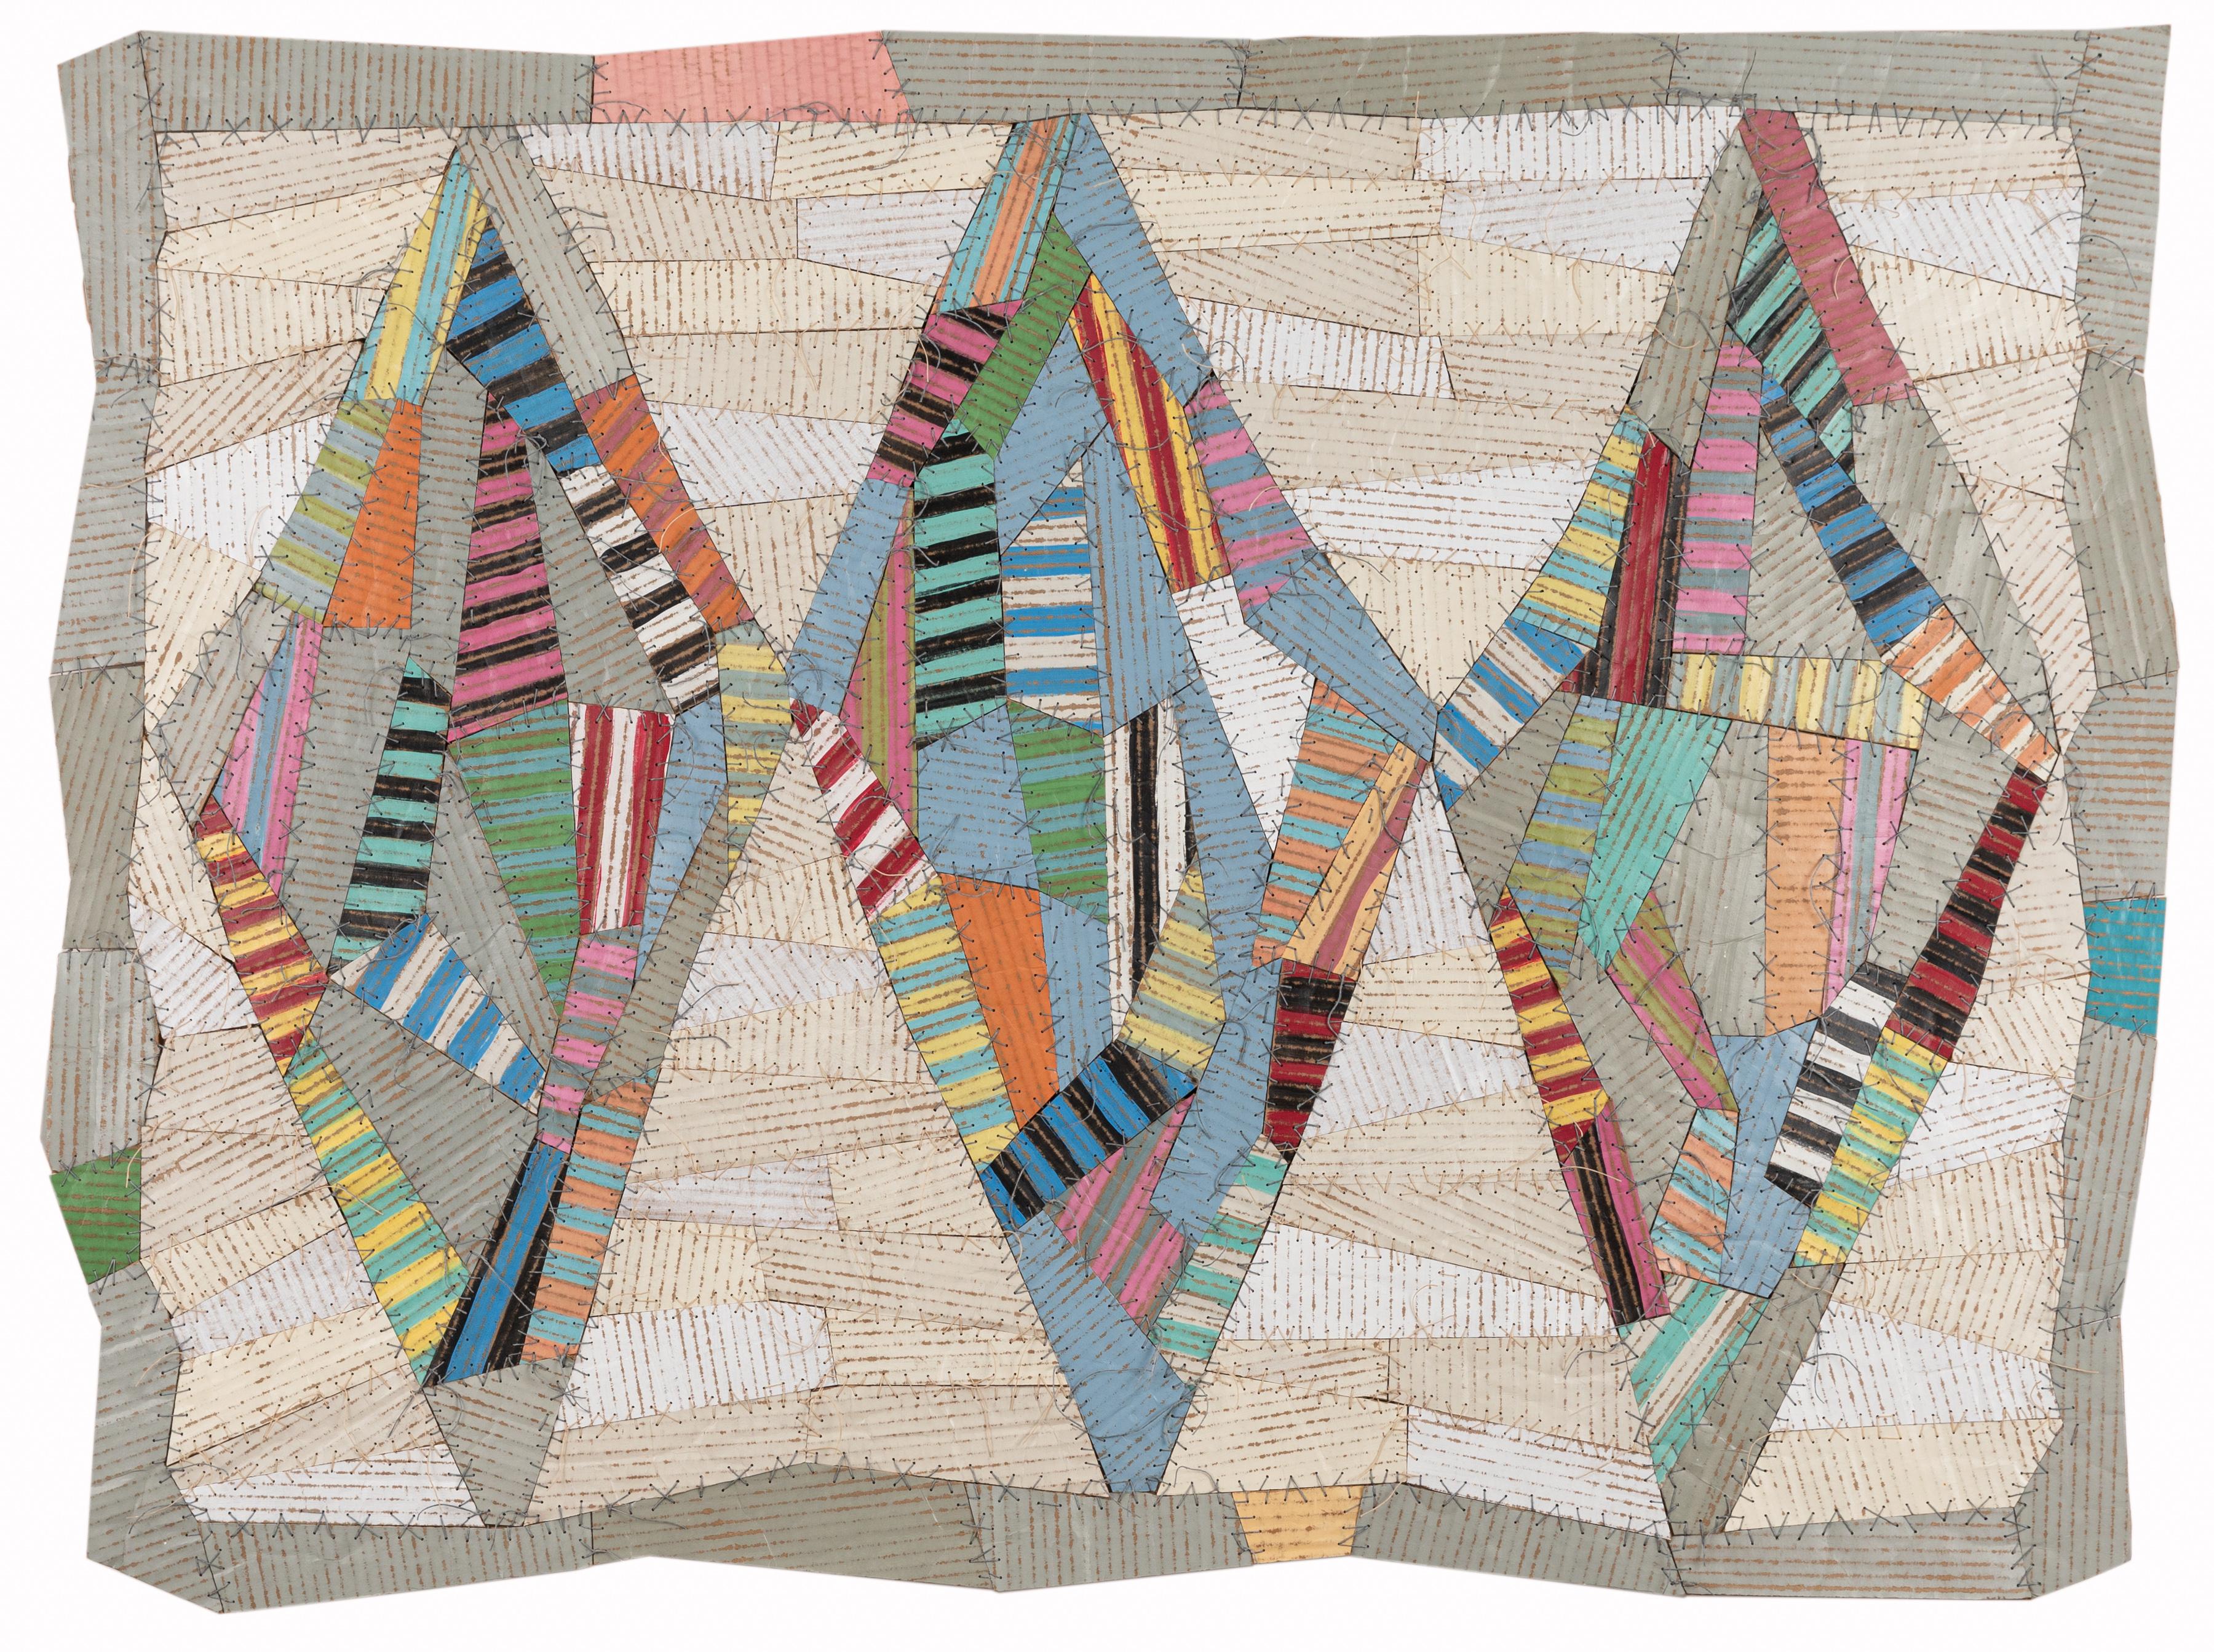 "Diamond Quilt" - a Contemporary, Colorful, Eclectic, Hand-Sewn Cardboard Quilt